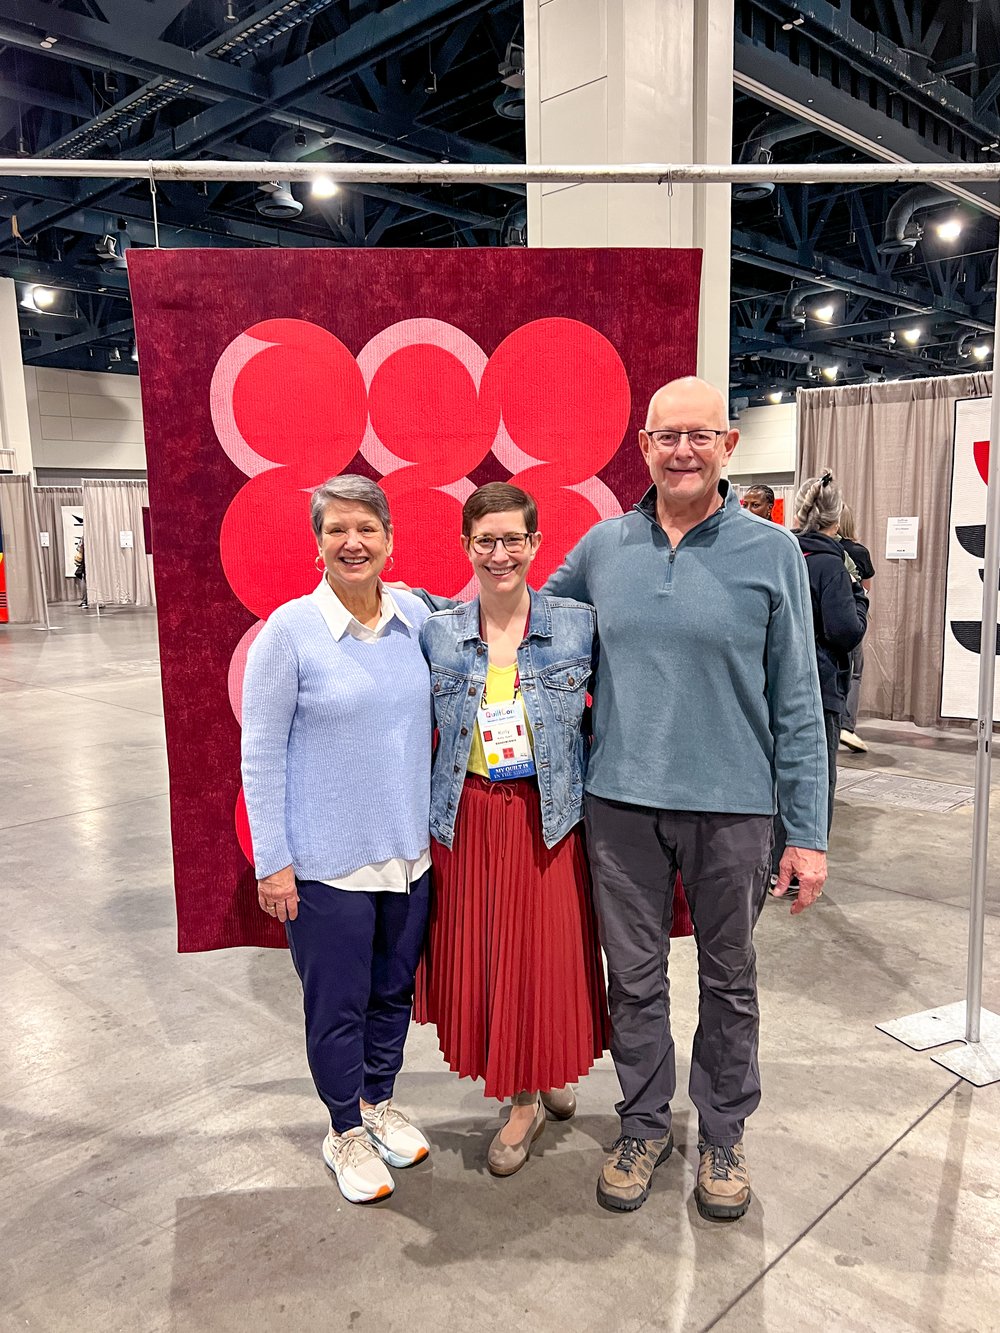 My parents attended their first QuiltCon